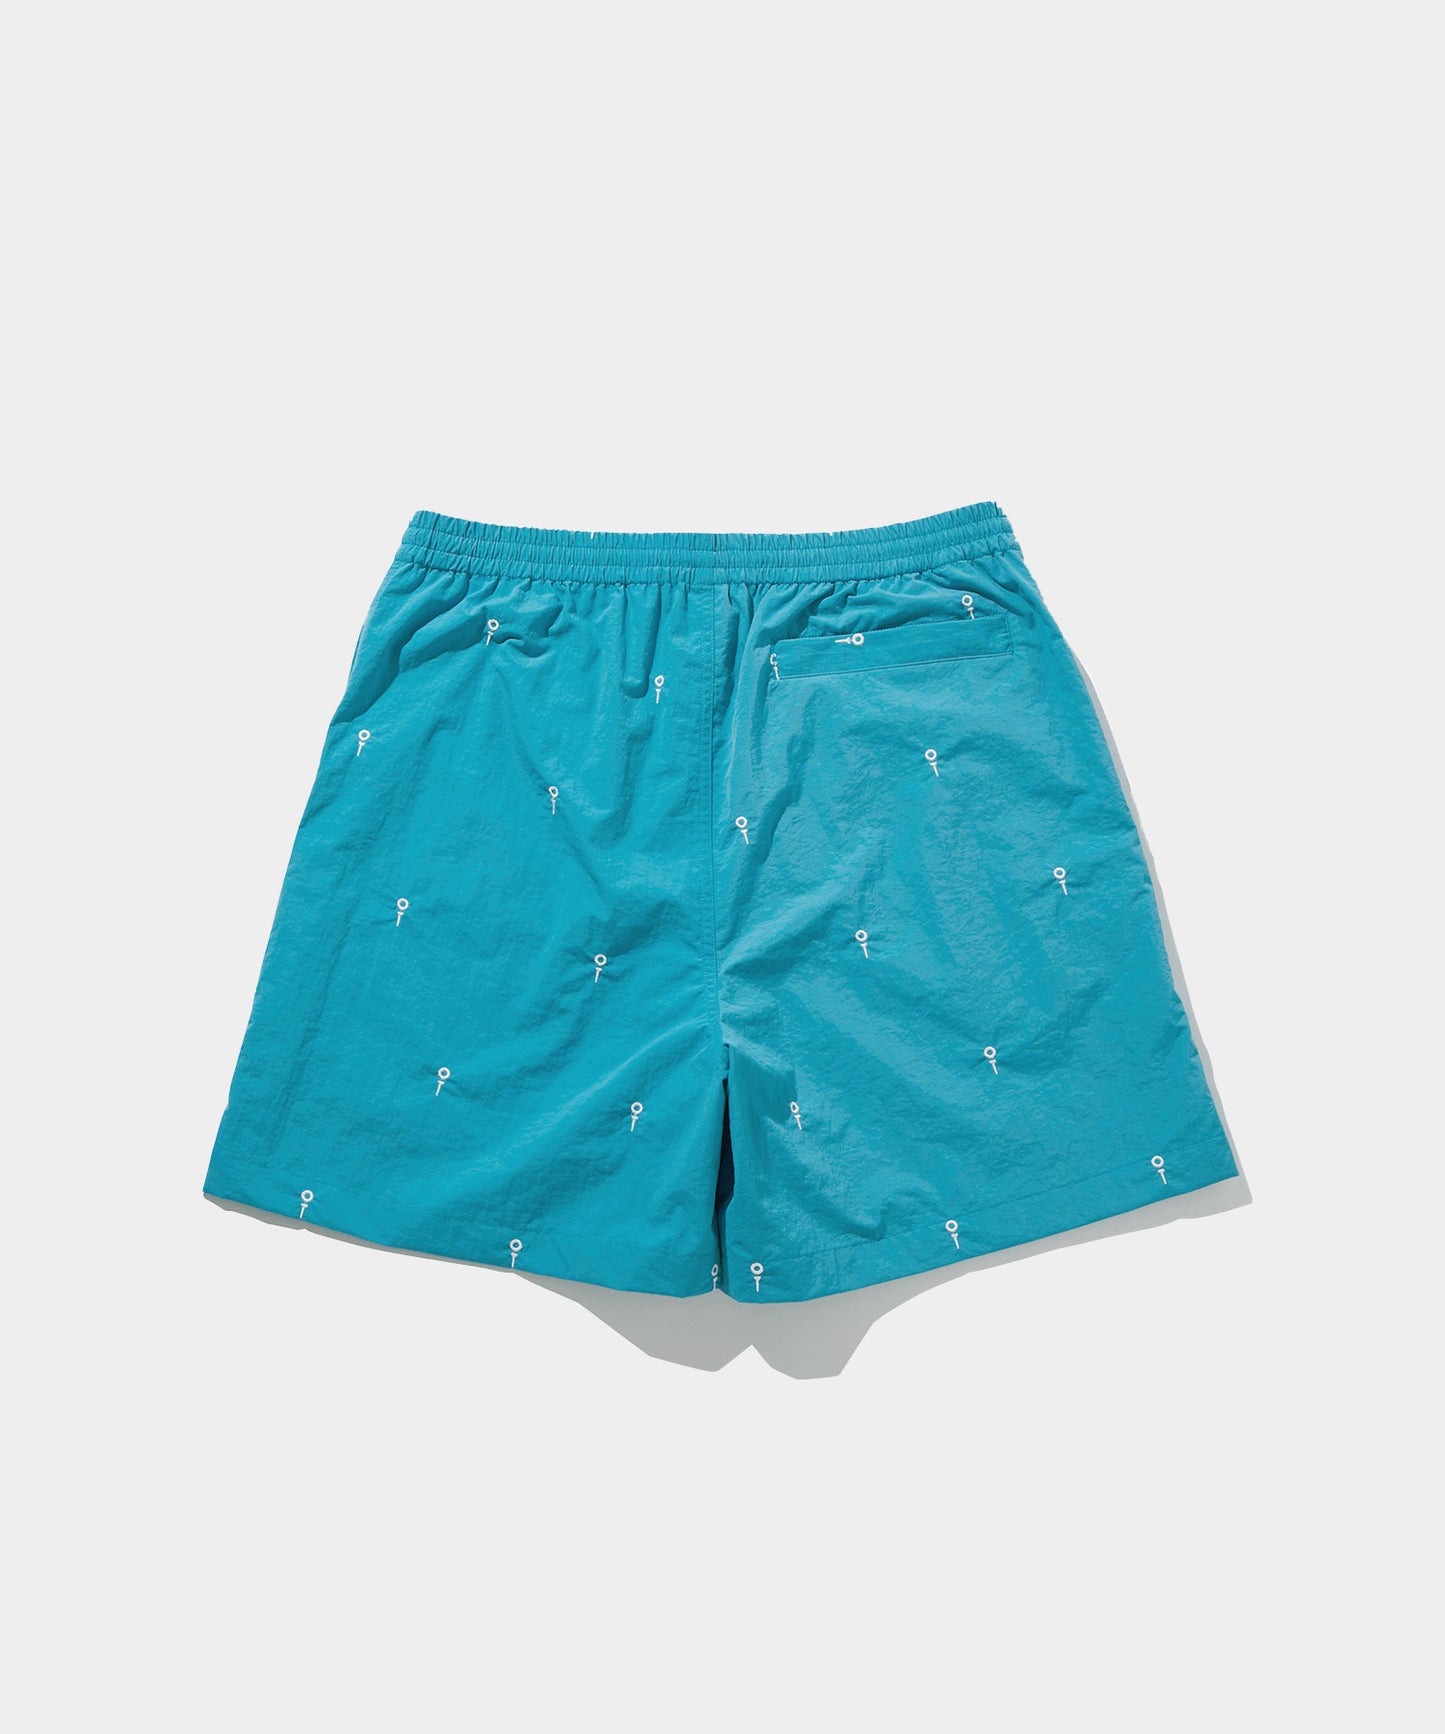 BALL AND TEE SHORTS BLUE